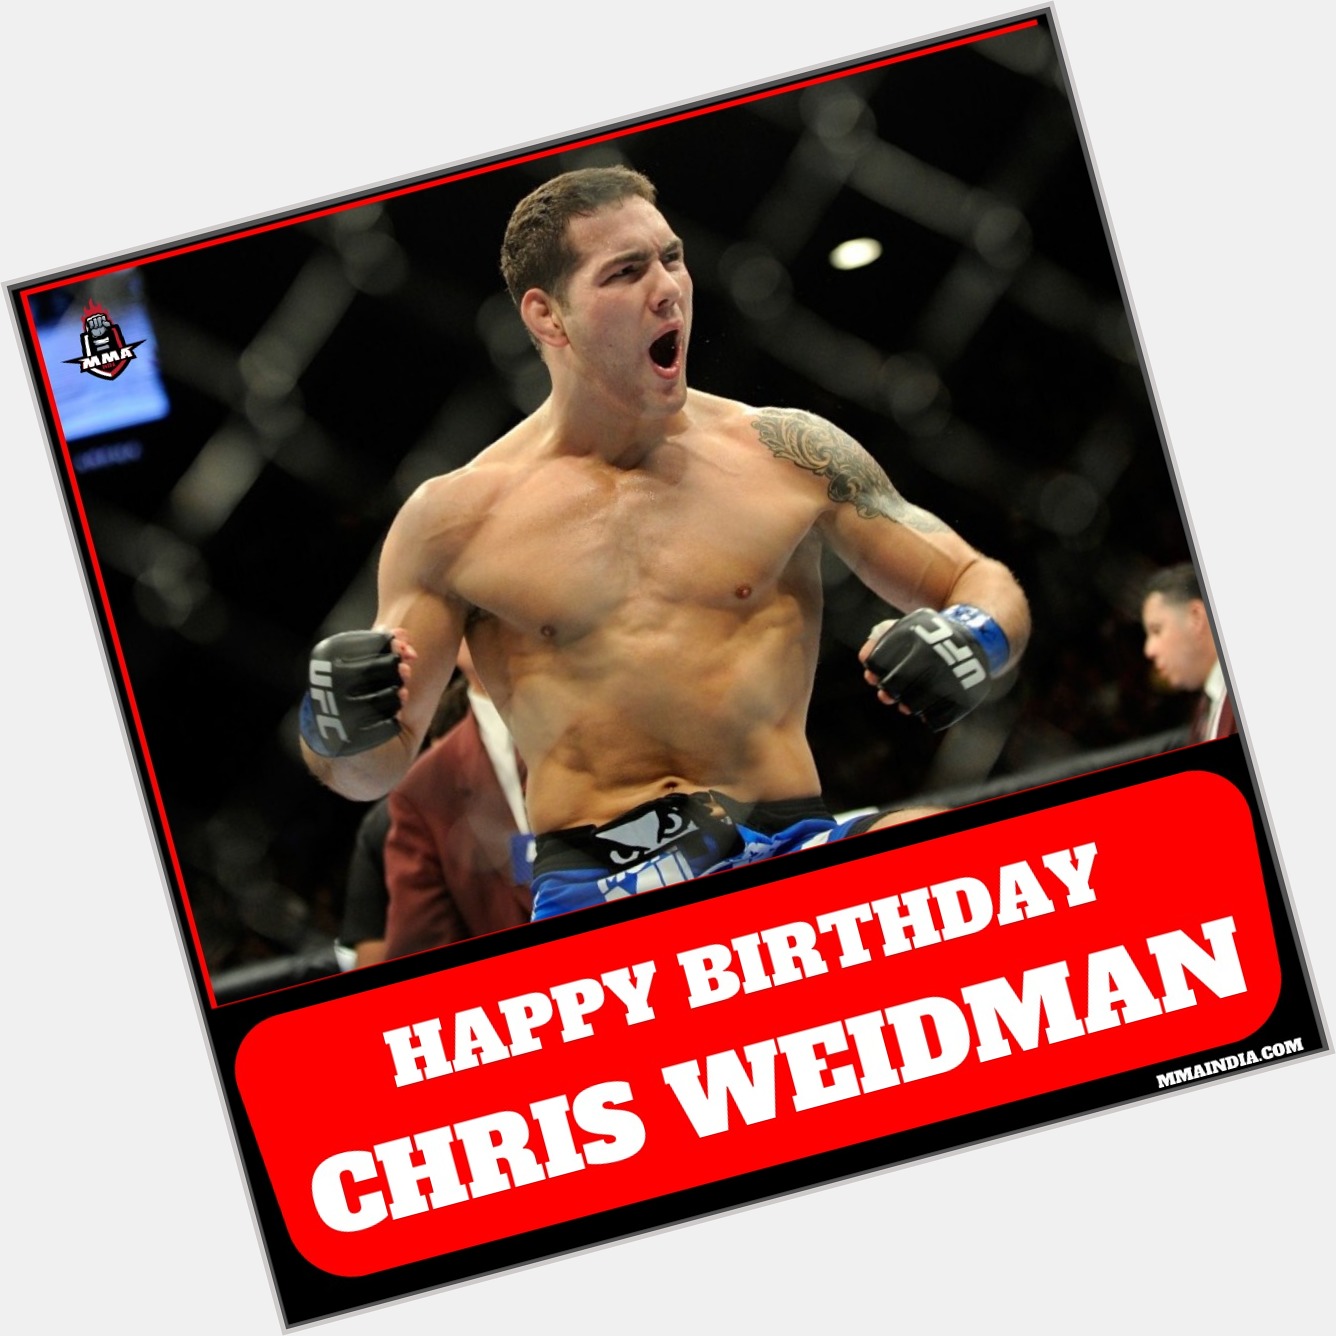 Wishing the All American Chris Weidman ( a very Happy Birthday!  Have a great one!   